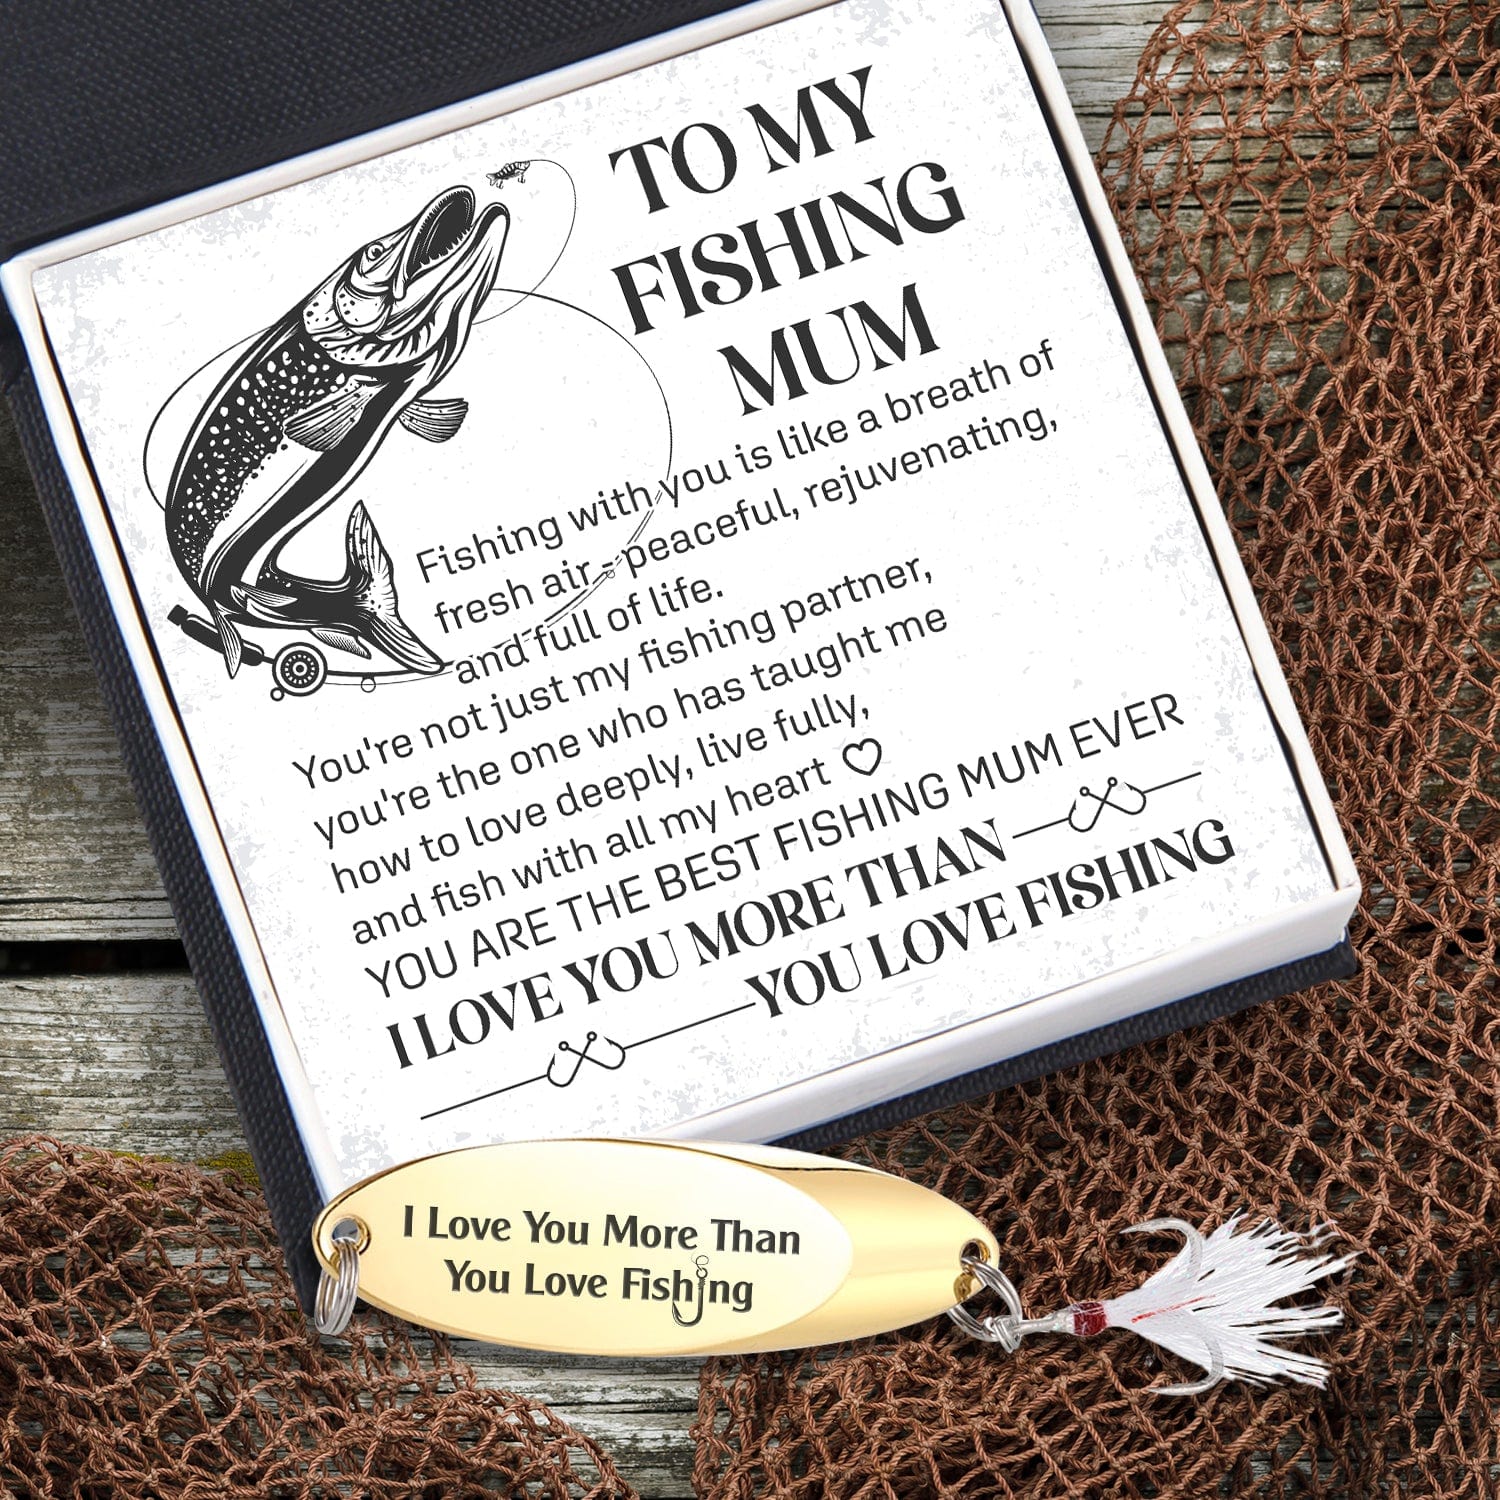 Deeper Gift Card - Perfect Gift for Fishermen